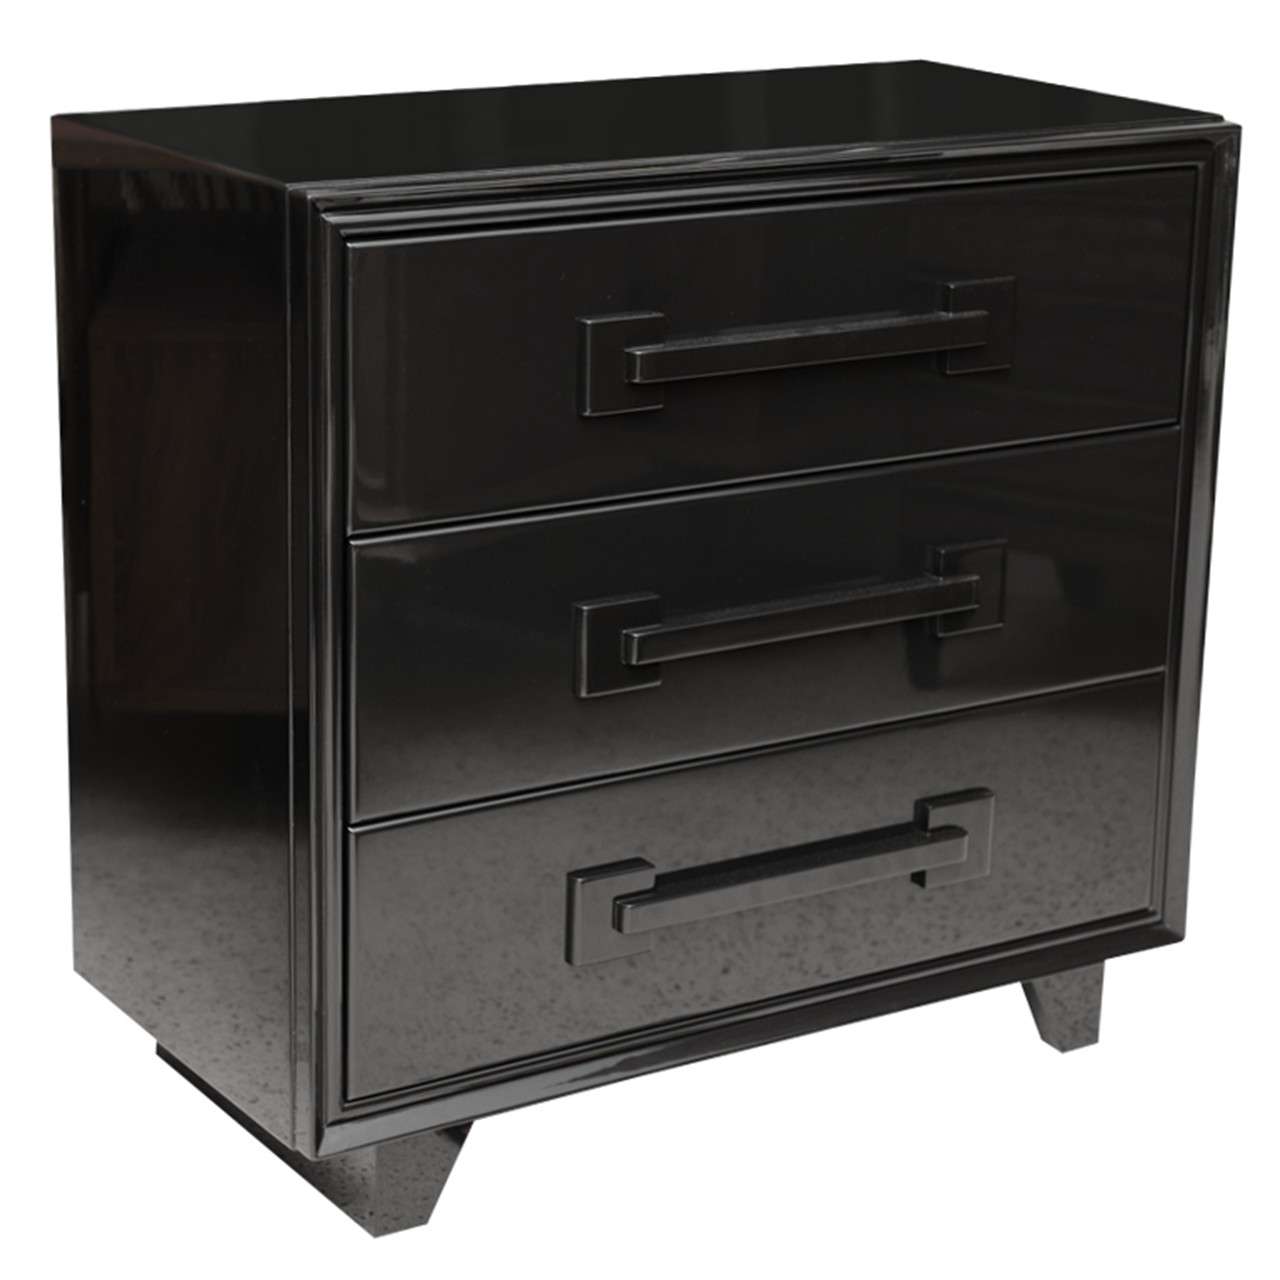 An Italian Modern Black Lacquer 3 Drawer Chest at 1stdibs